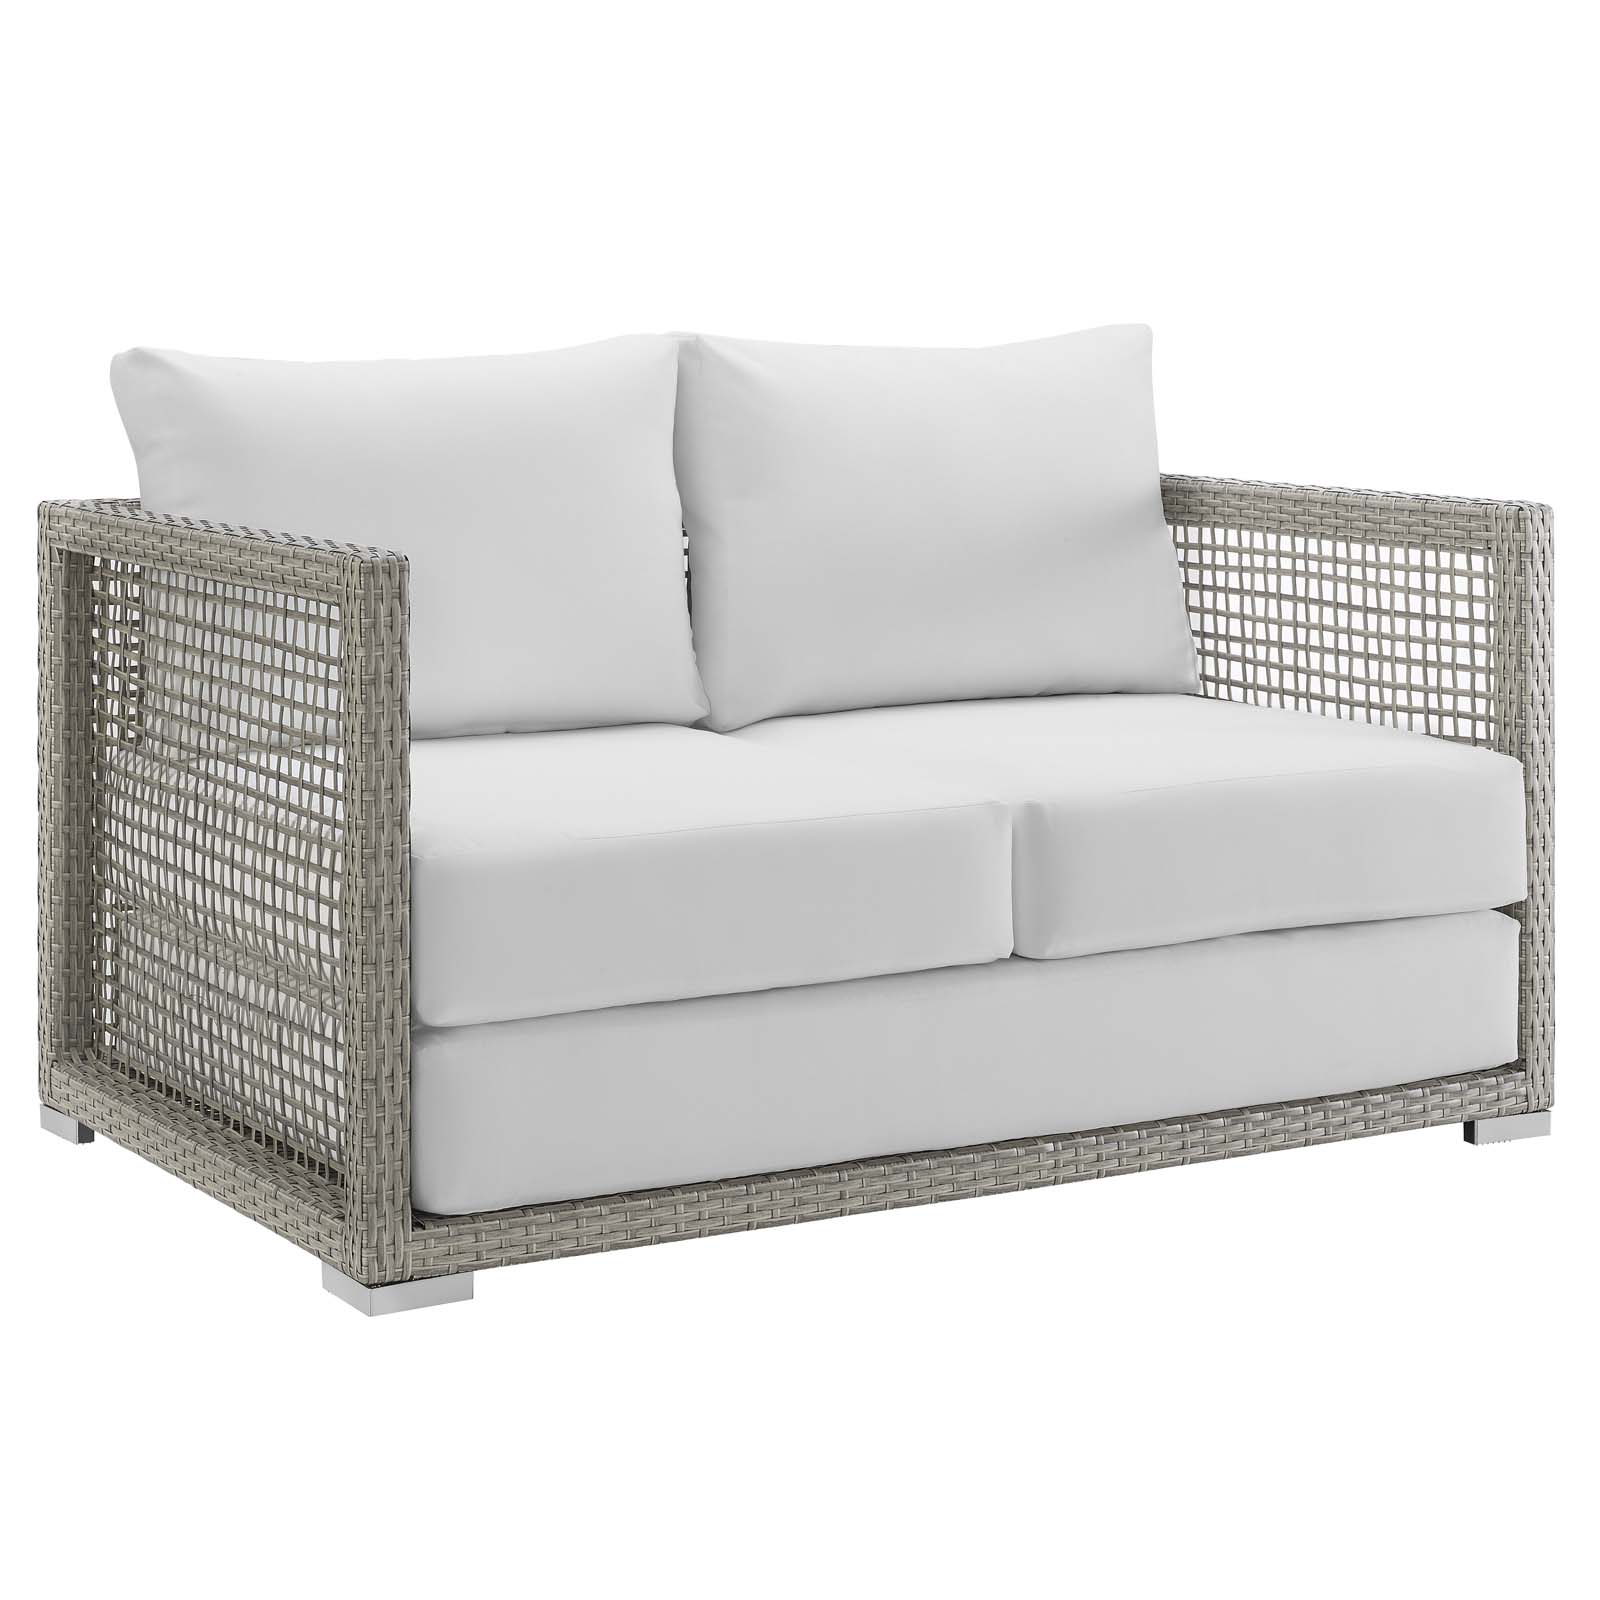 Contemporary Modern Urban Designer Outdoor Patio Balcony Garden Furniture Lounge Sofa, Chair and Coffee Table Set, Rattan Wicker Fabric, Grey Gray White - image 5 of 8